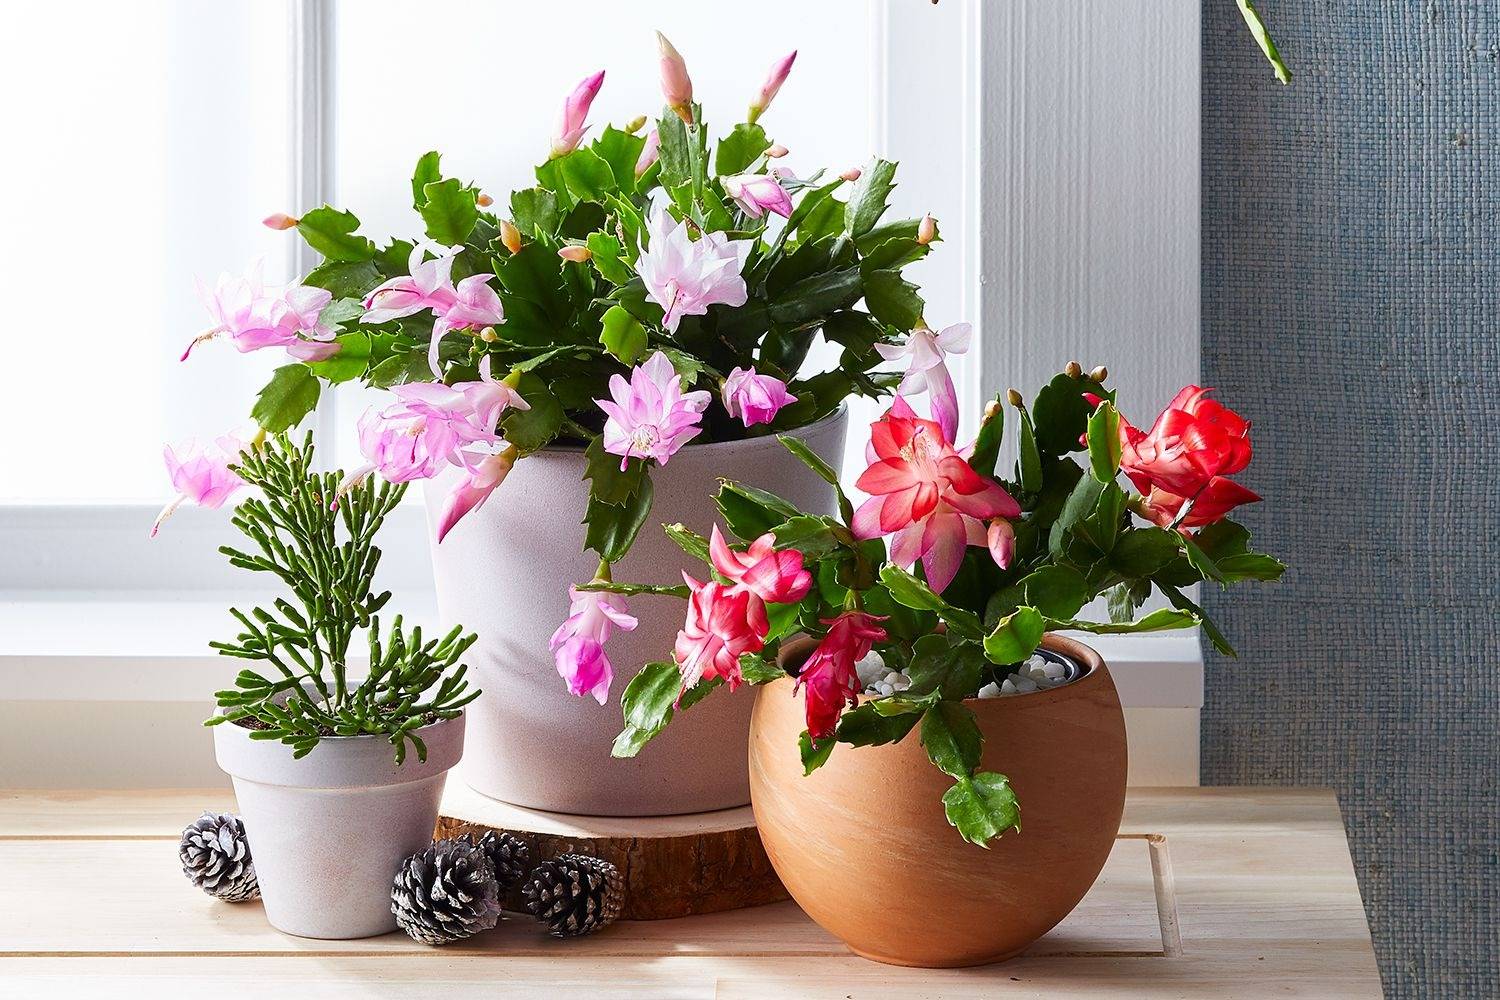 Tips To Make Christmas Cactus Bloom In Time For The Holidays - 87